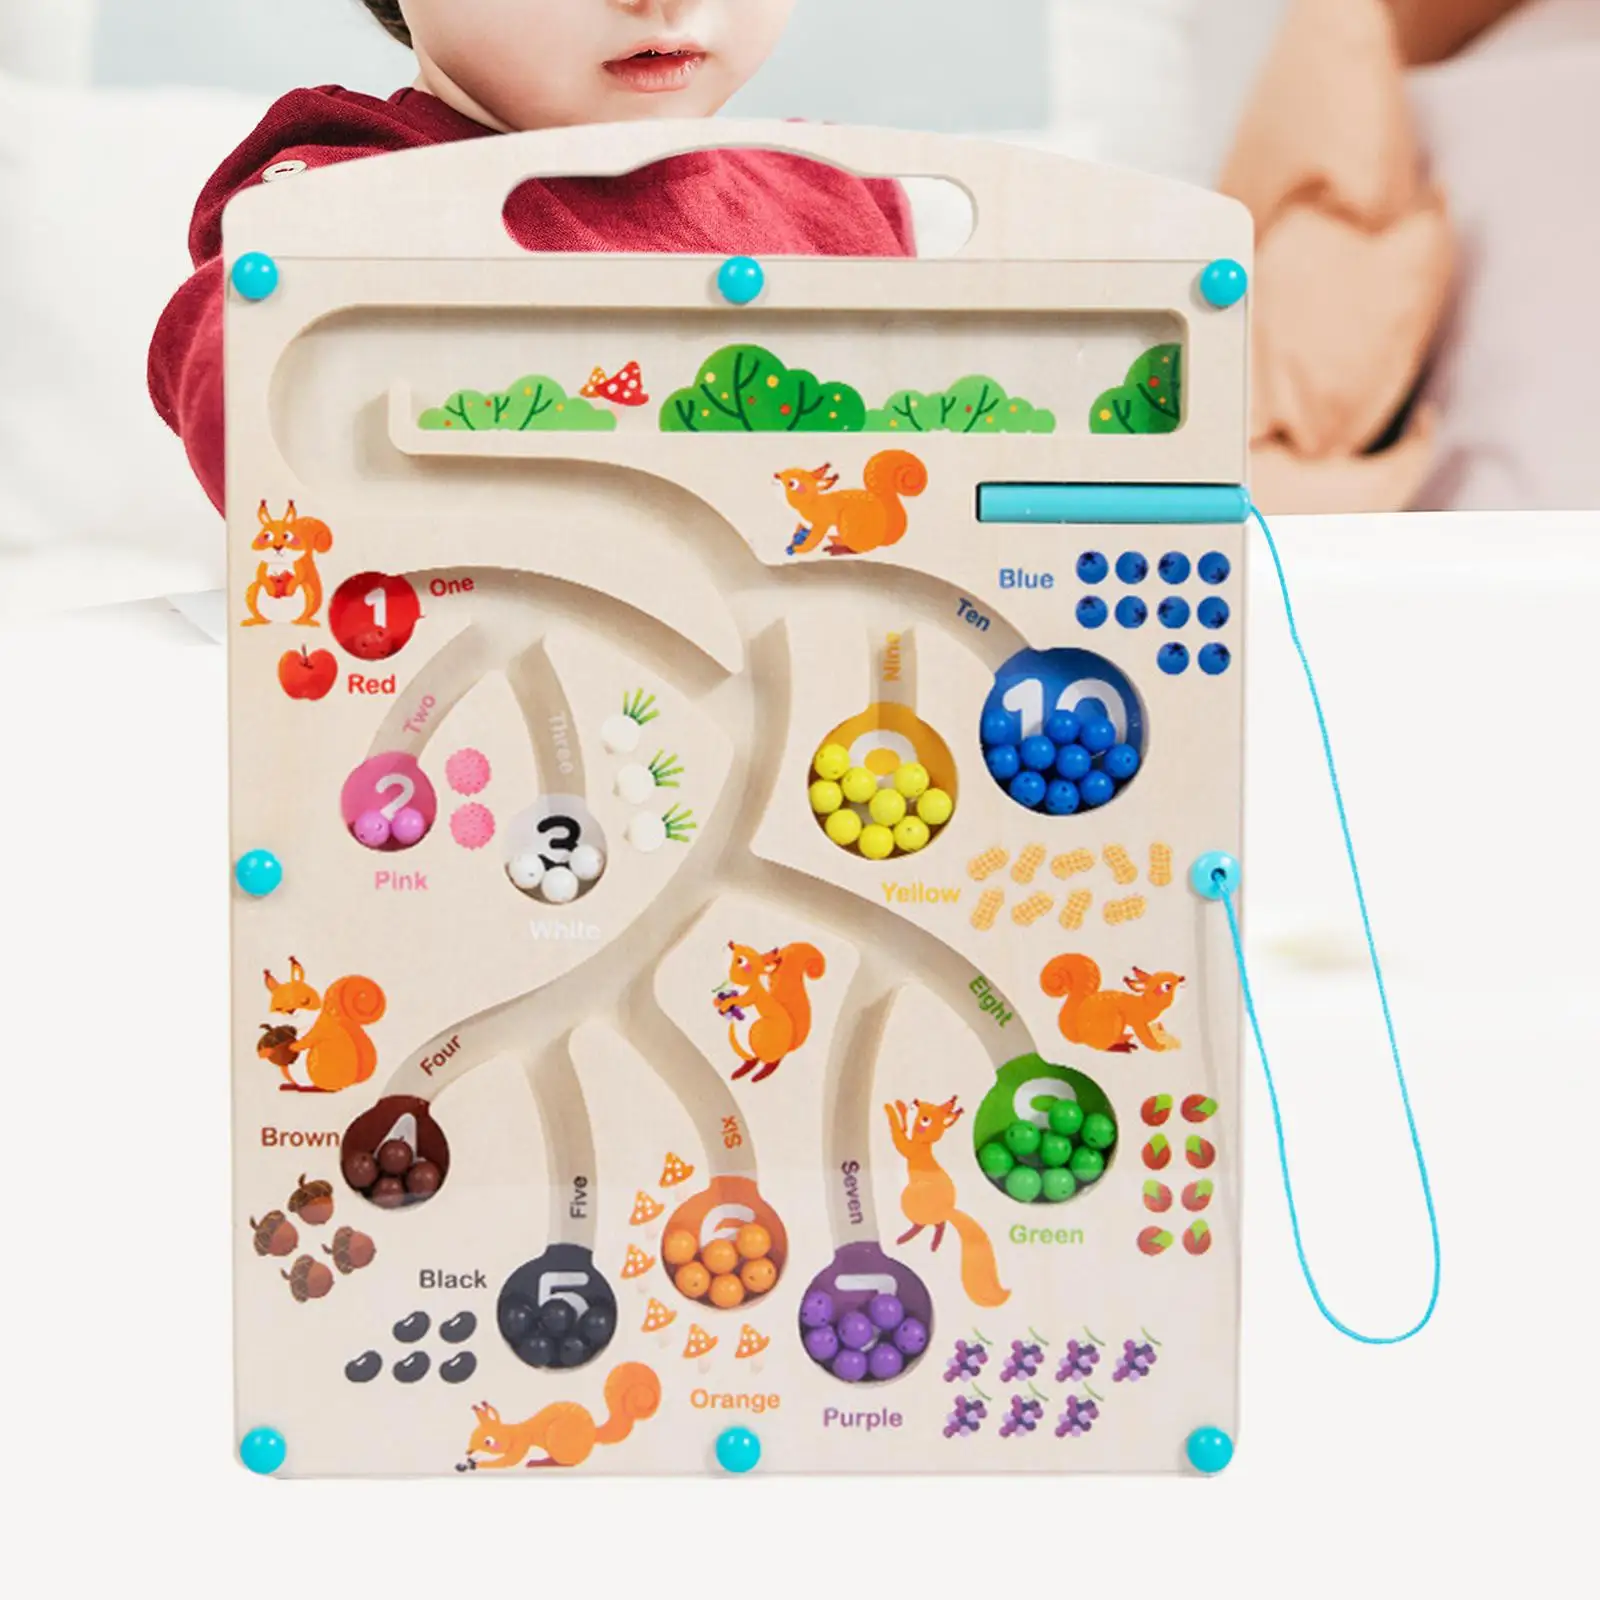 Wooden Magnetic Maze Toy Fine Motor Skills Toys Color Matching Learning Counting Puzzles Board for Girls Boys Kids Toddlers Gift